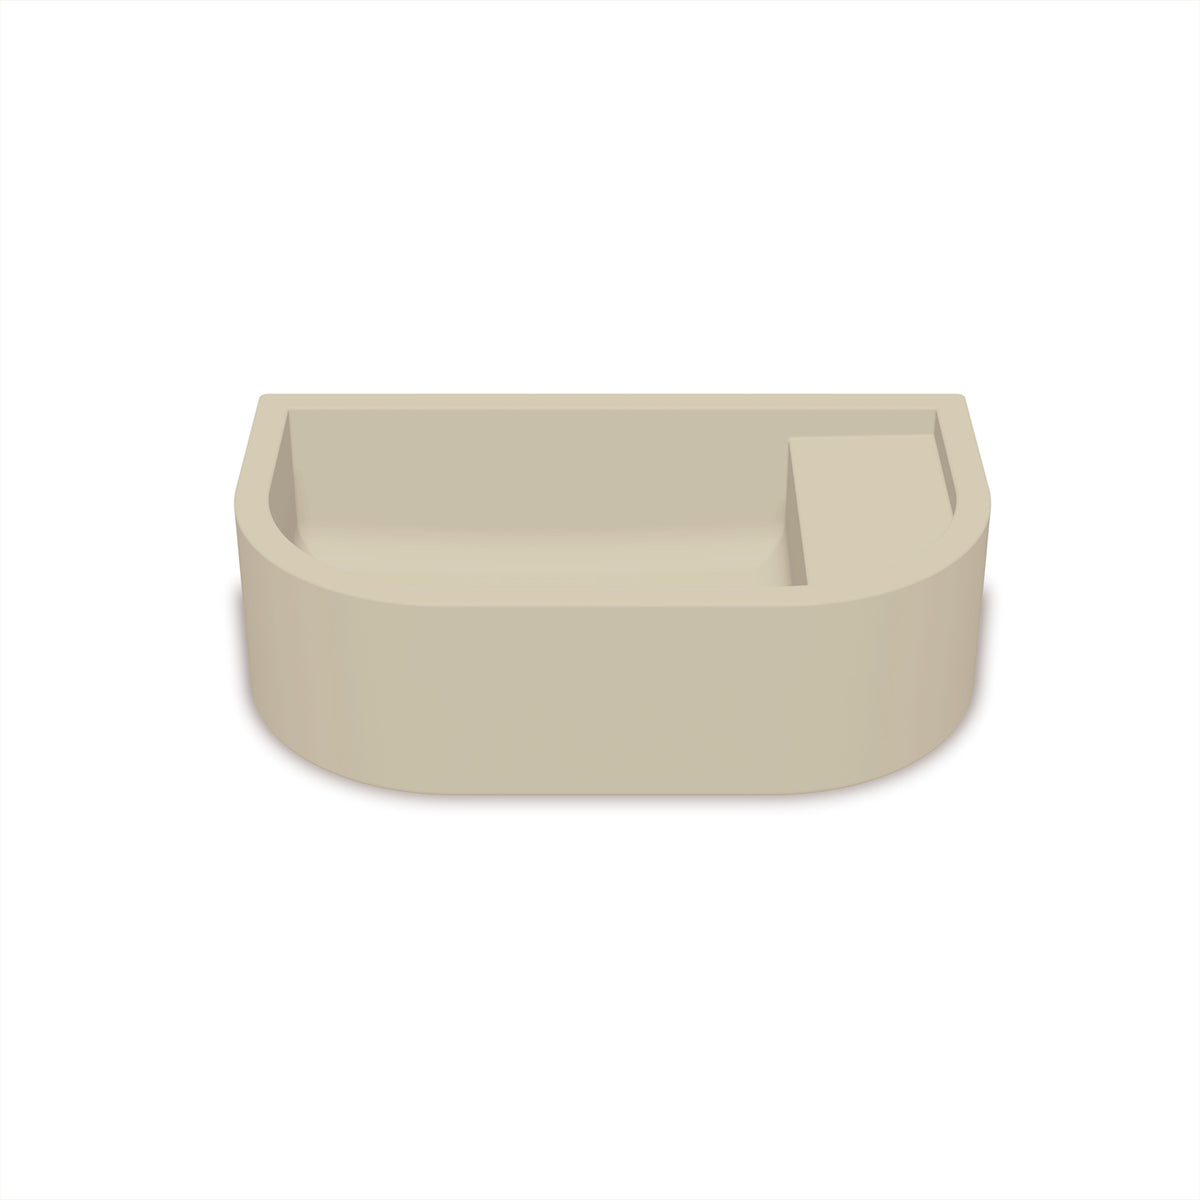 Loop 01 Basin - Surface Mount (Sand,No Tap Hole)